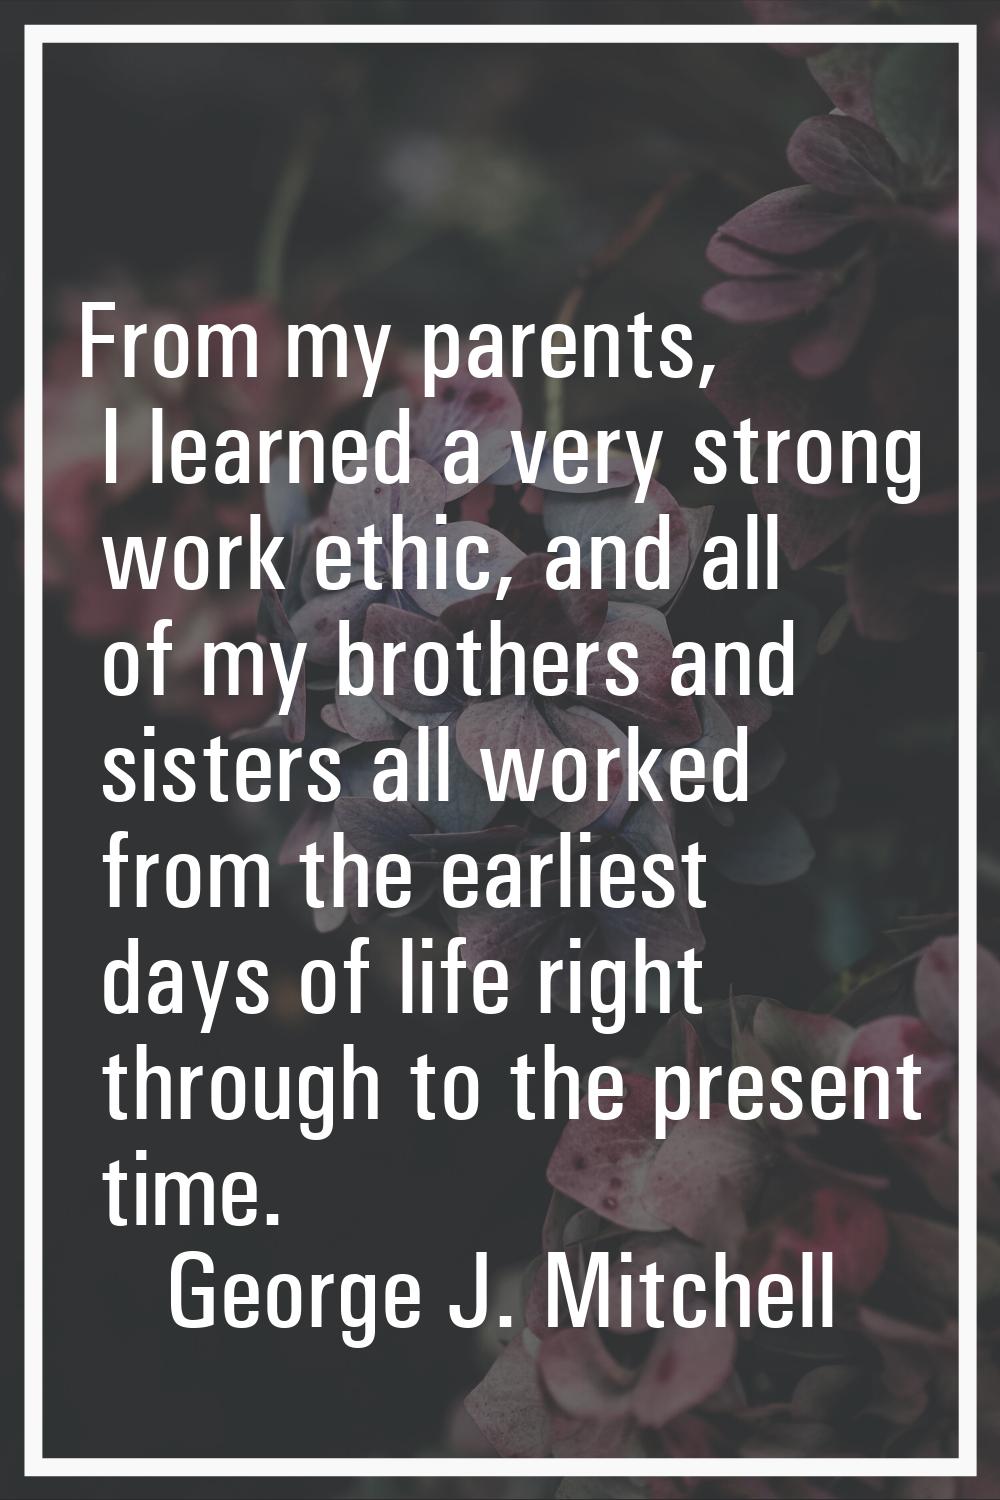 From my parents, I learned a very strong work ethic, and all of my brothers and sisters all worked 